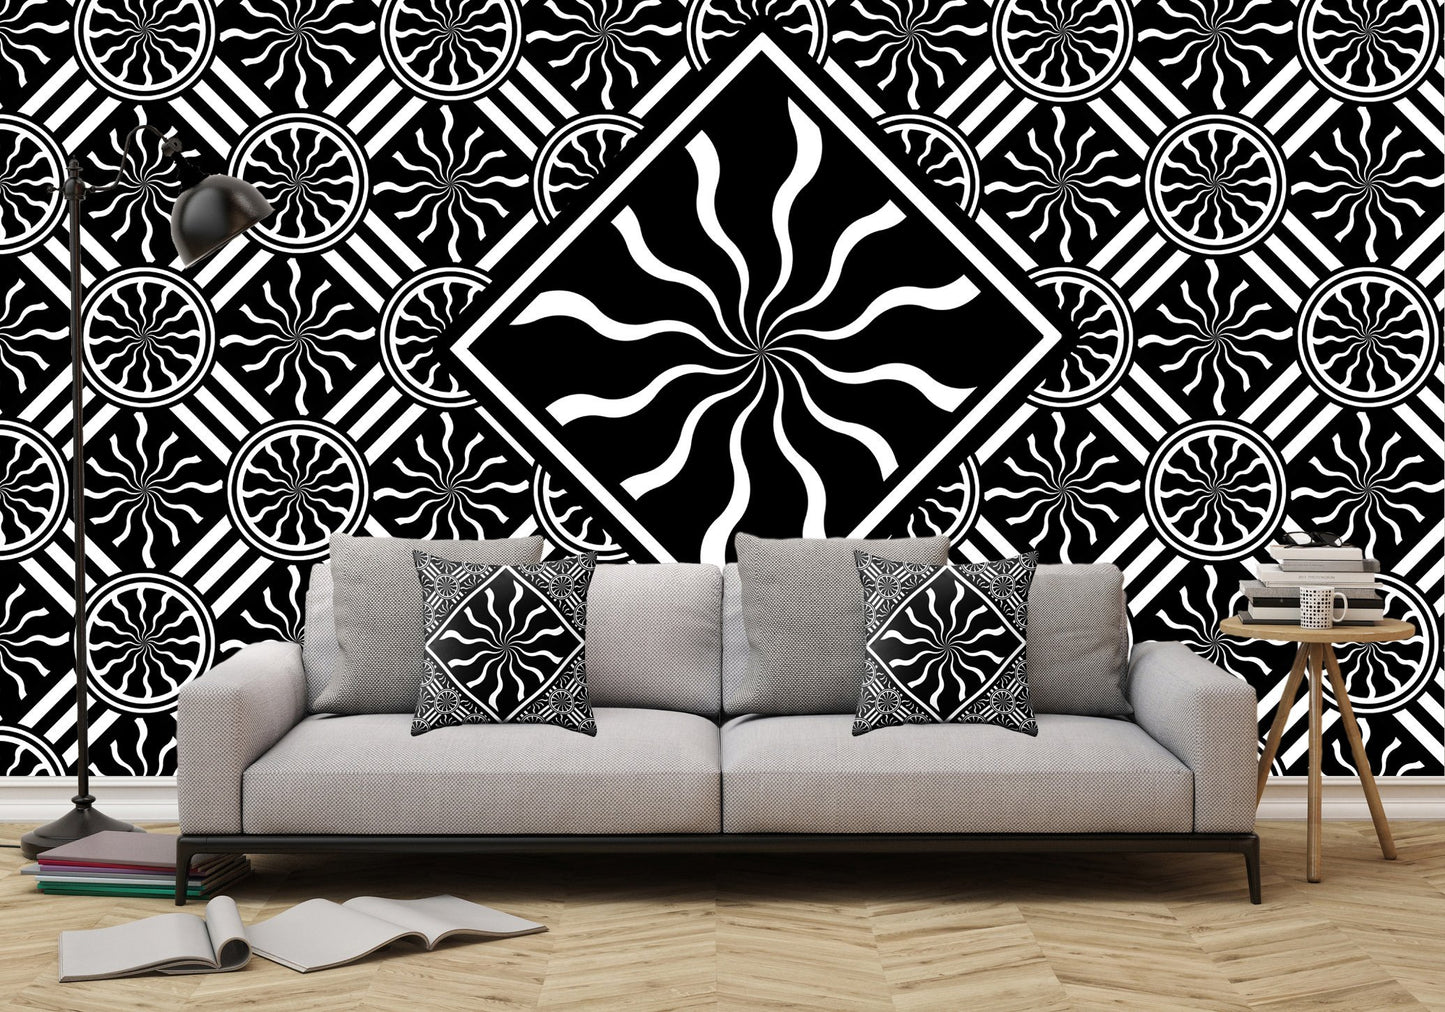 Wavy Black and White Diamond Pinwheels and Stripes 2 - Peel and Stick Removable Wallpaper Full Size Wall Mural  - PIPAFINEART